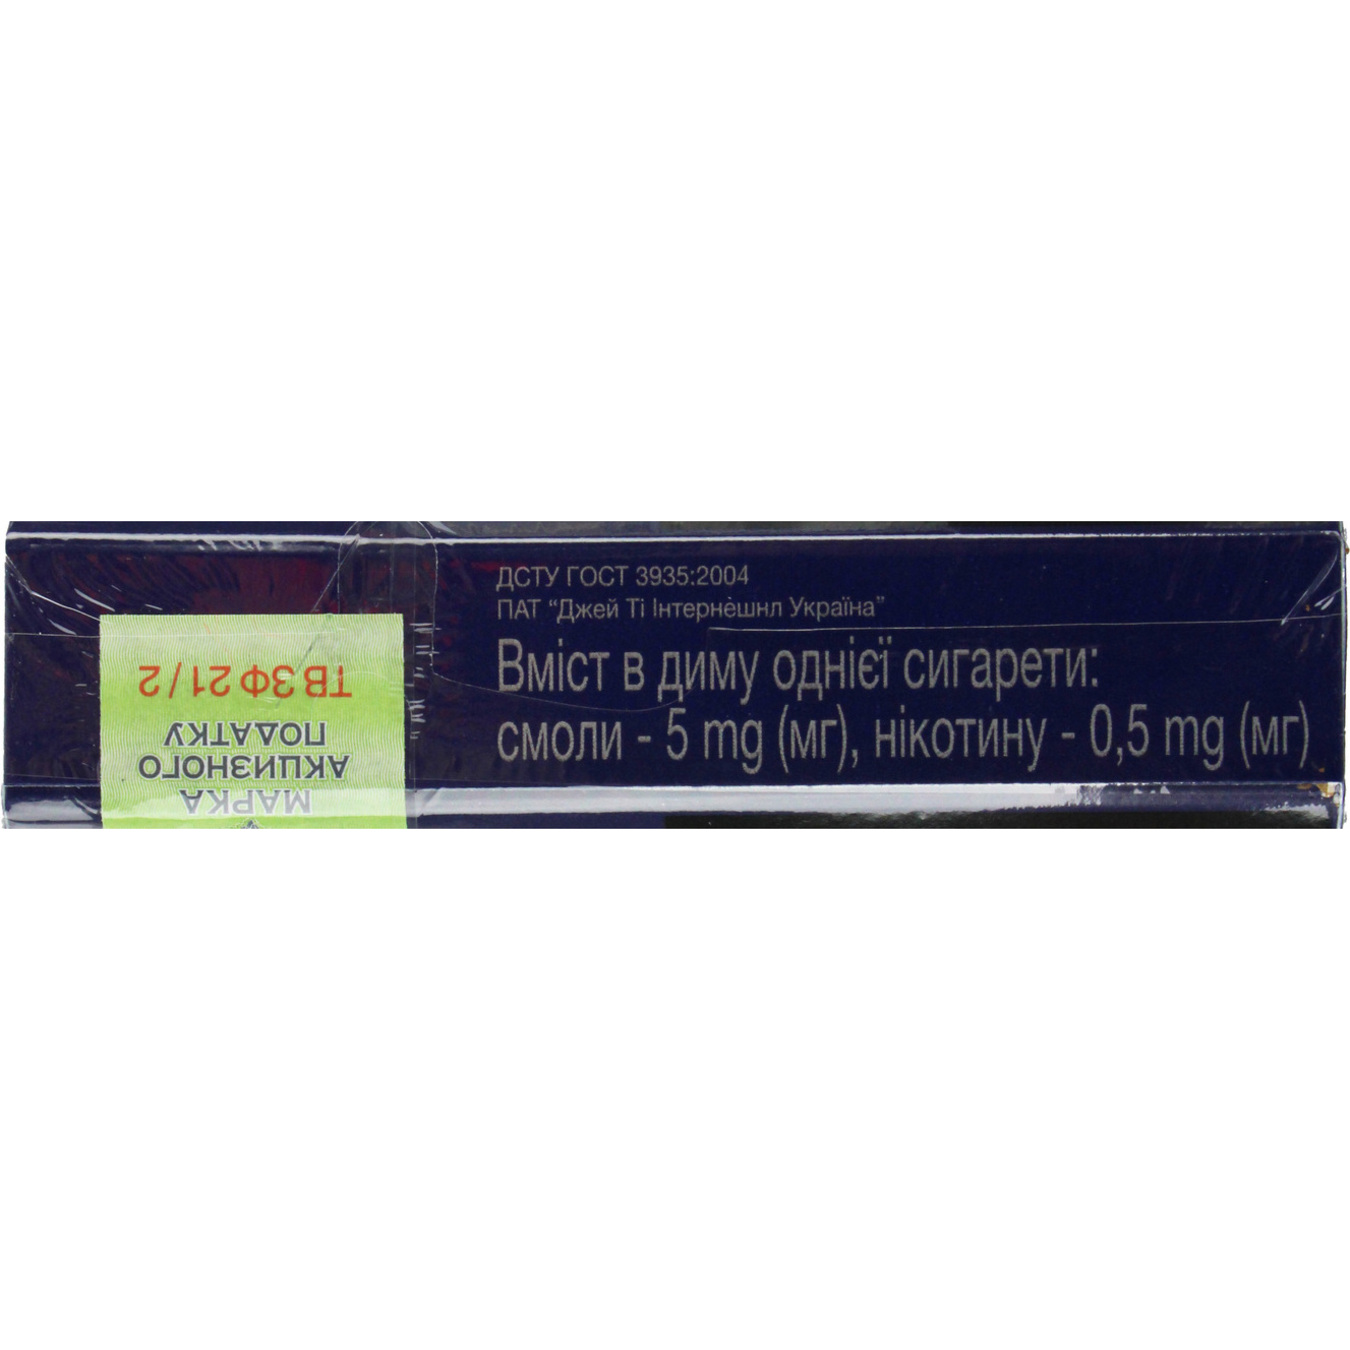 Sobranie Blue Cigarettes (the price is indicated without excise tax) 2